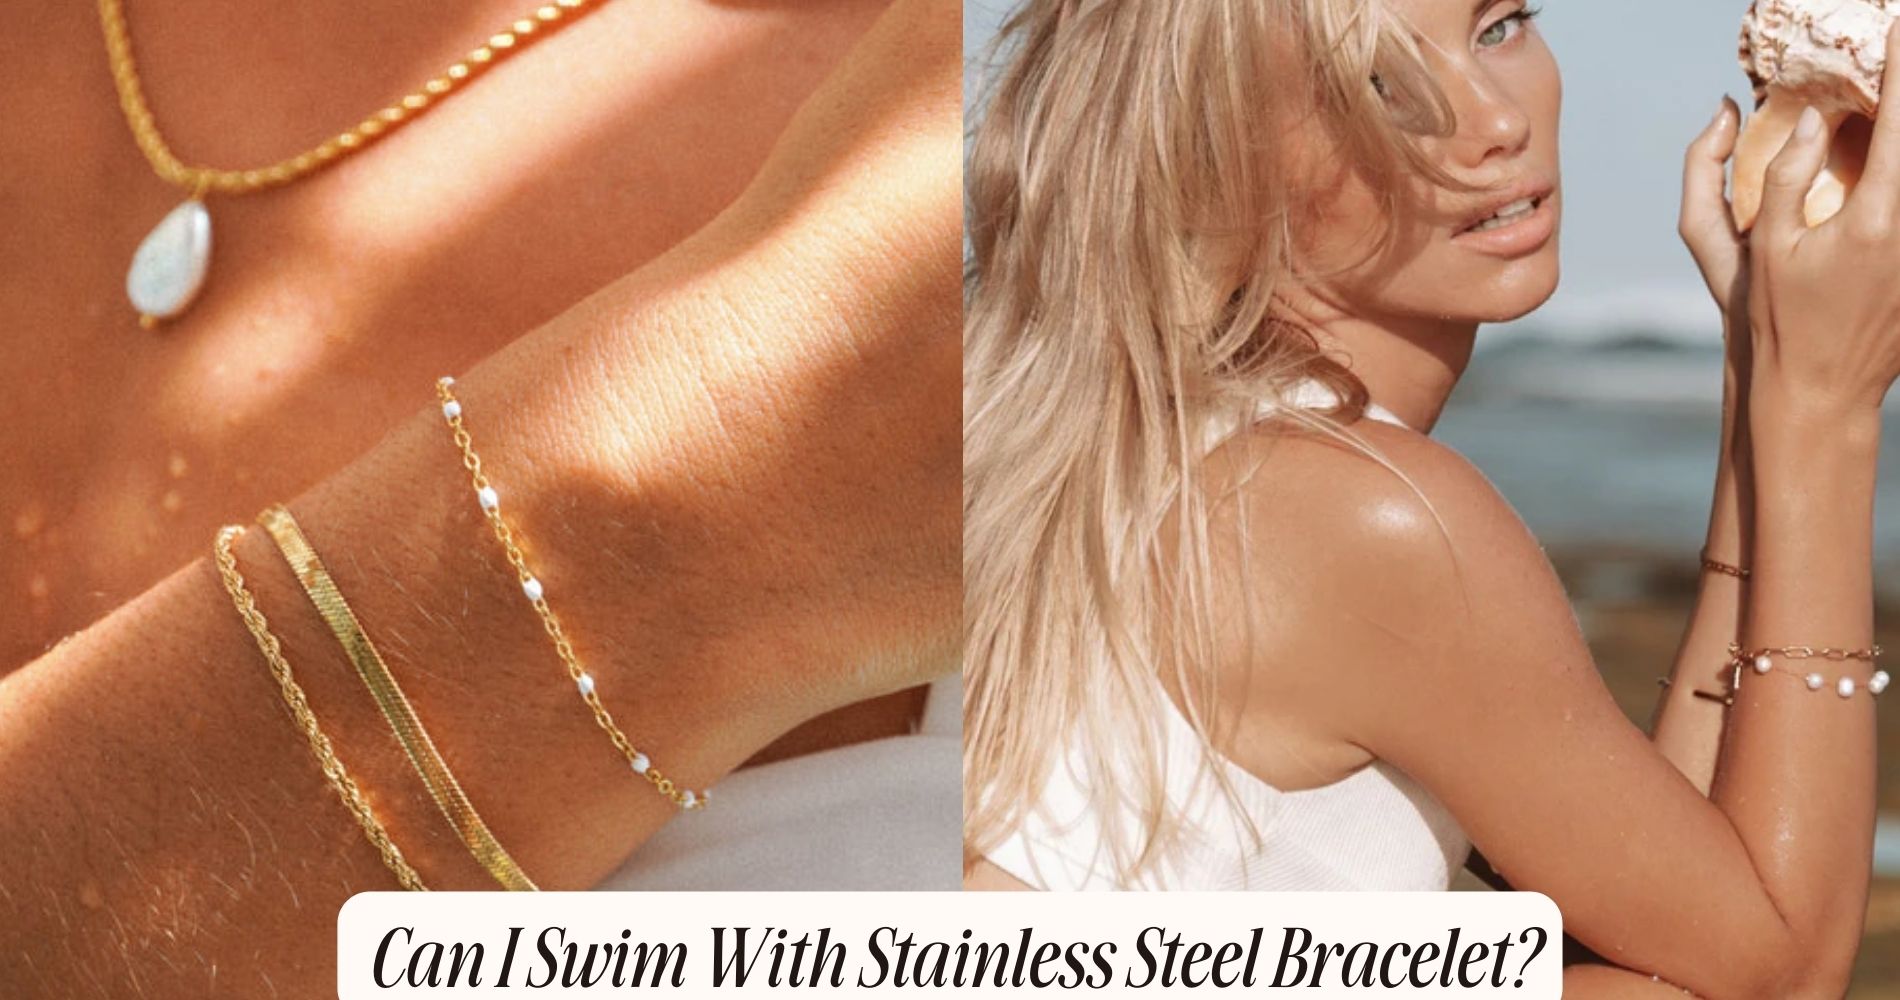 Can I swim with stainless steel bracelet?